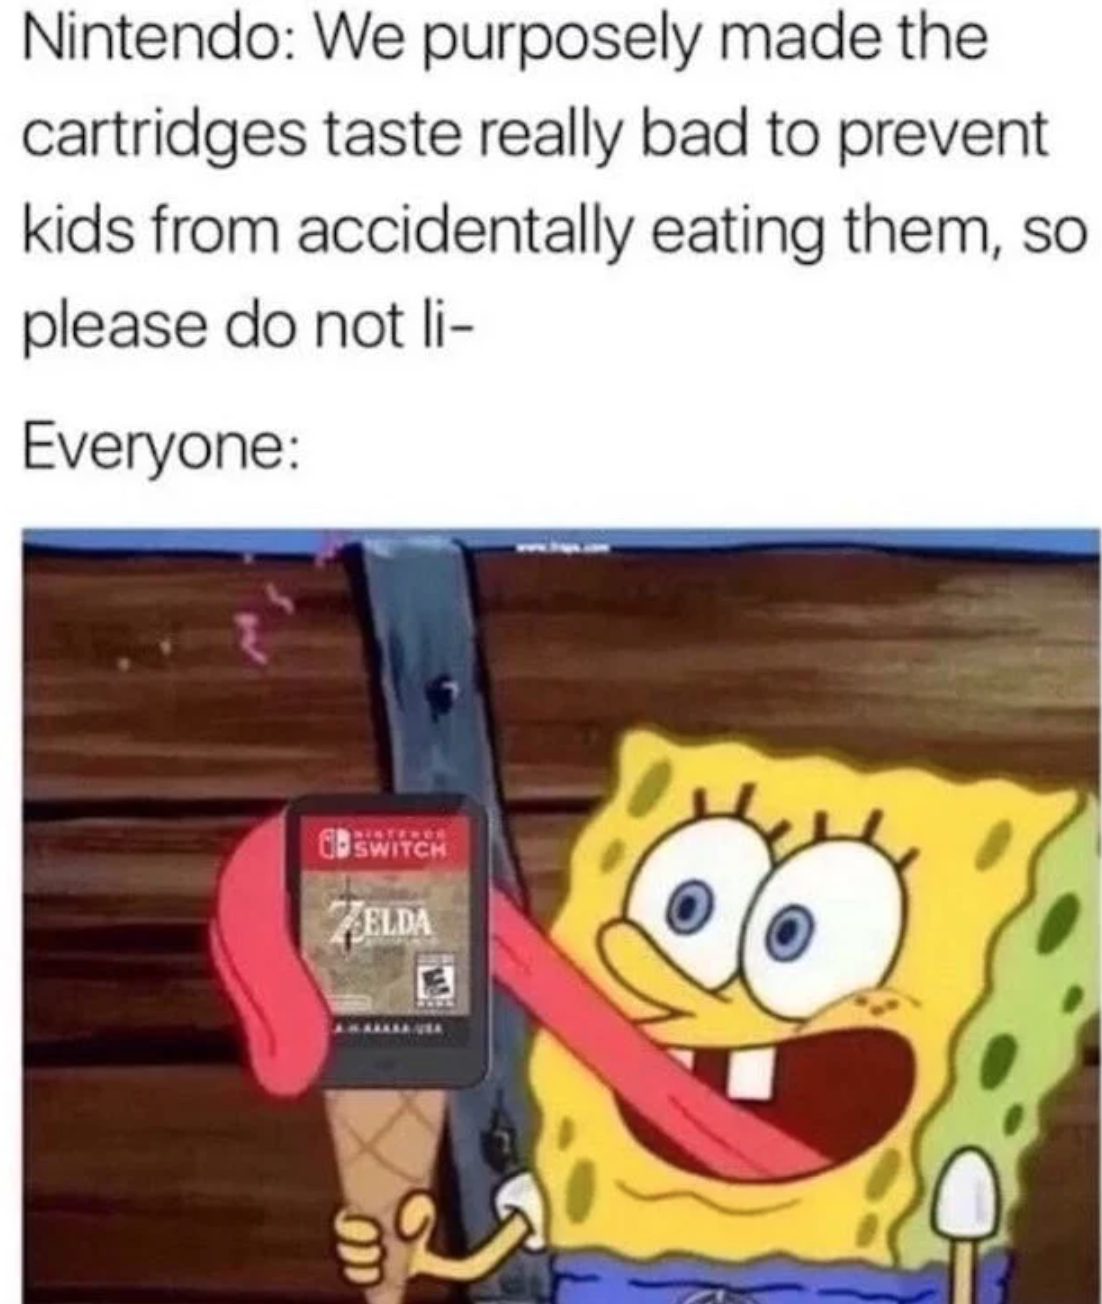 funny gaming memes - cartoon - Nintendo We purposely made the cartridges taste really bad to prevent kids from accidentally eating them, so please do not li Everyone Ee Switch Elda